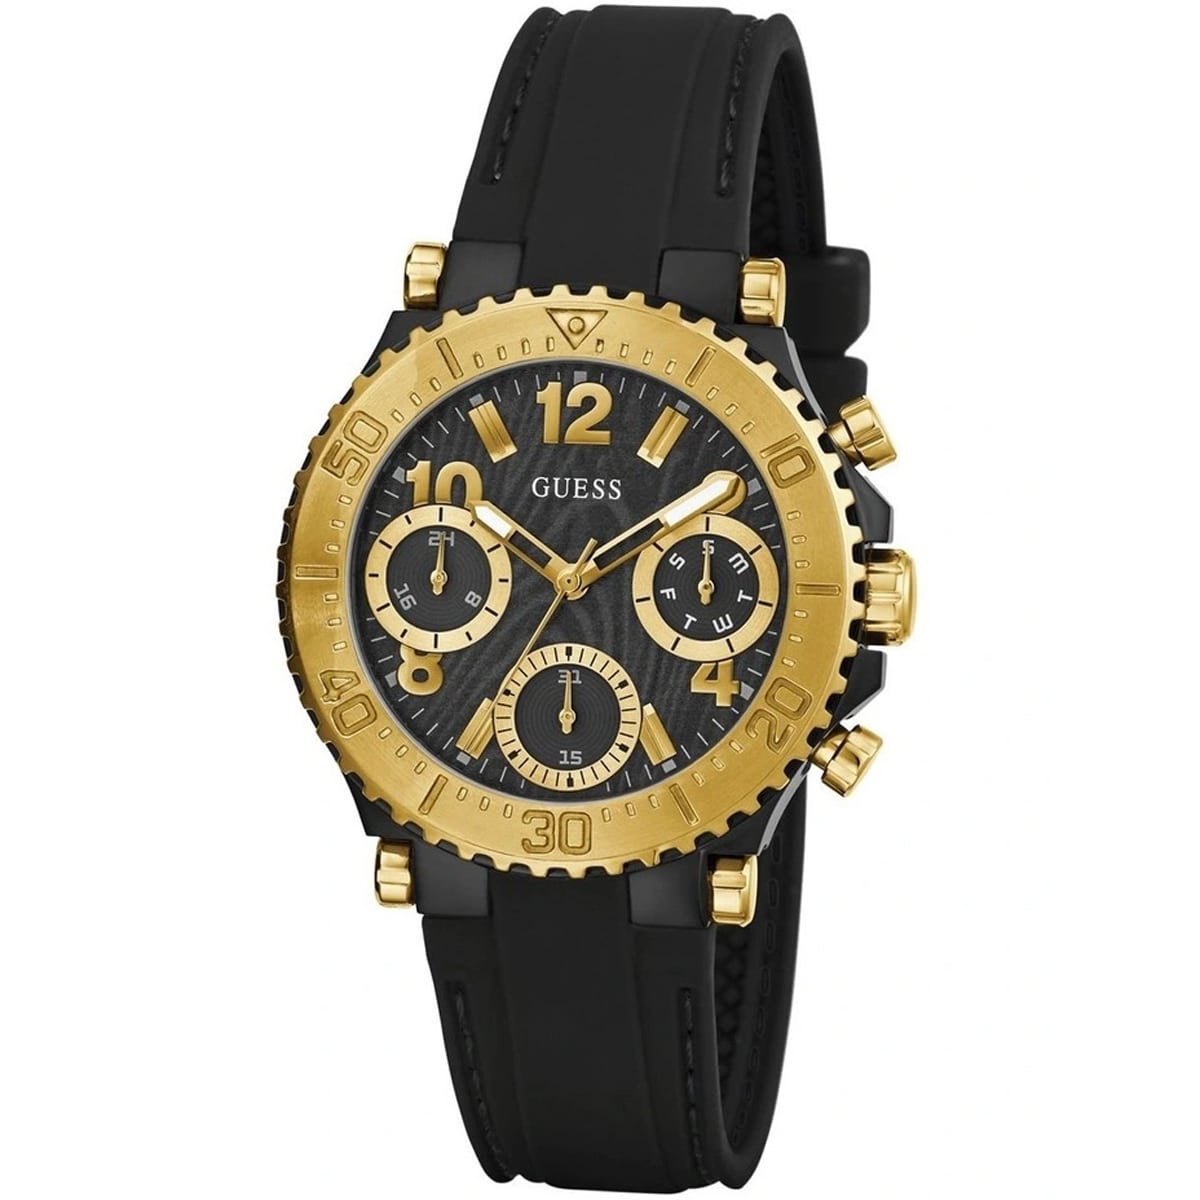 MONTRE GUESS COSMIC FEMME M.FONCTION SILICONE